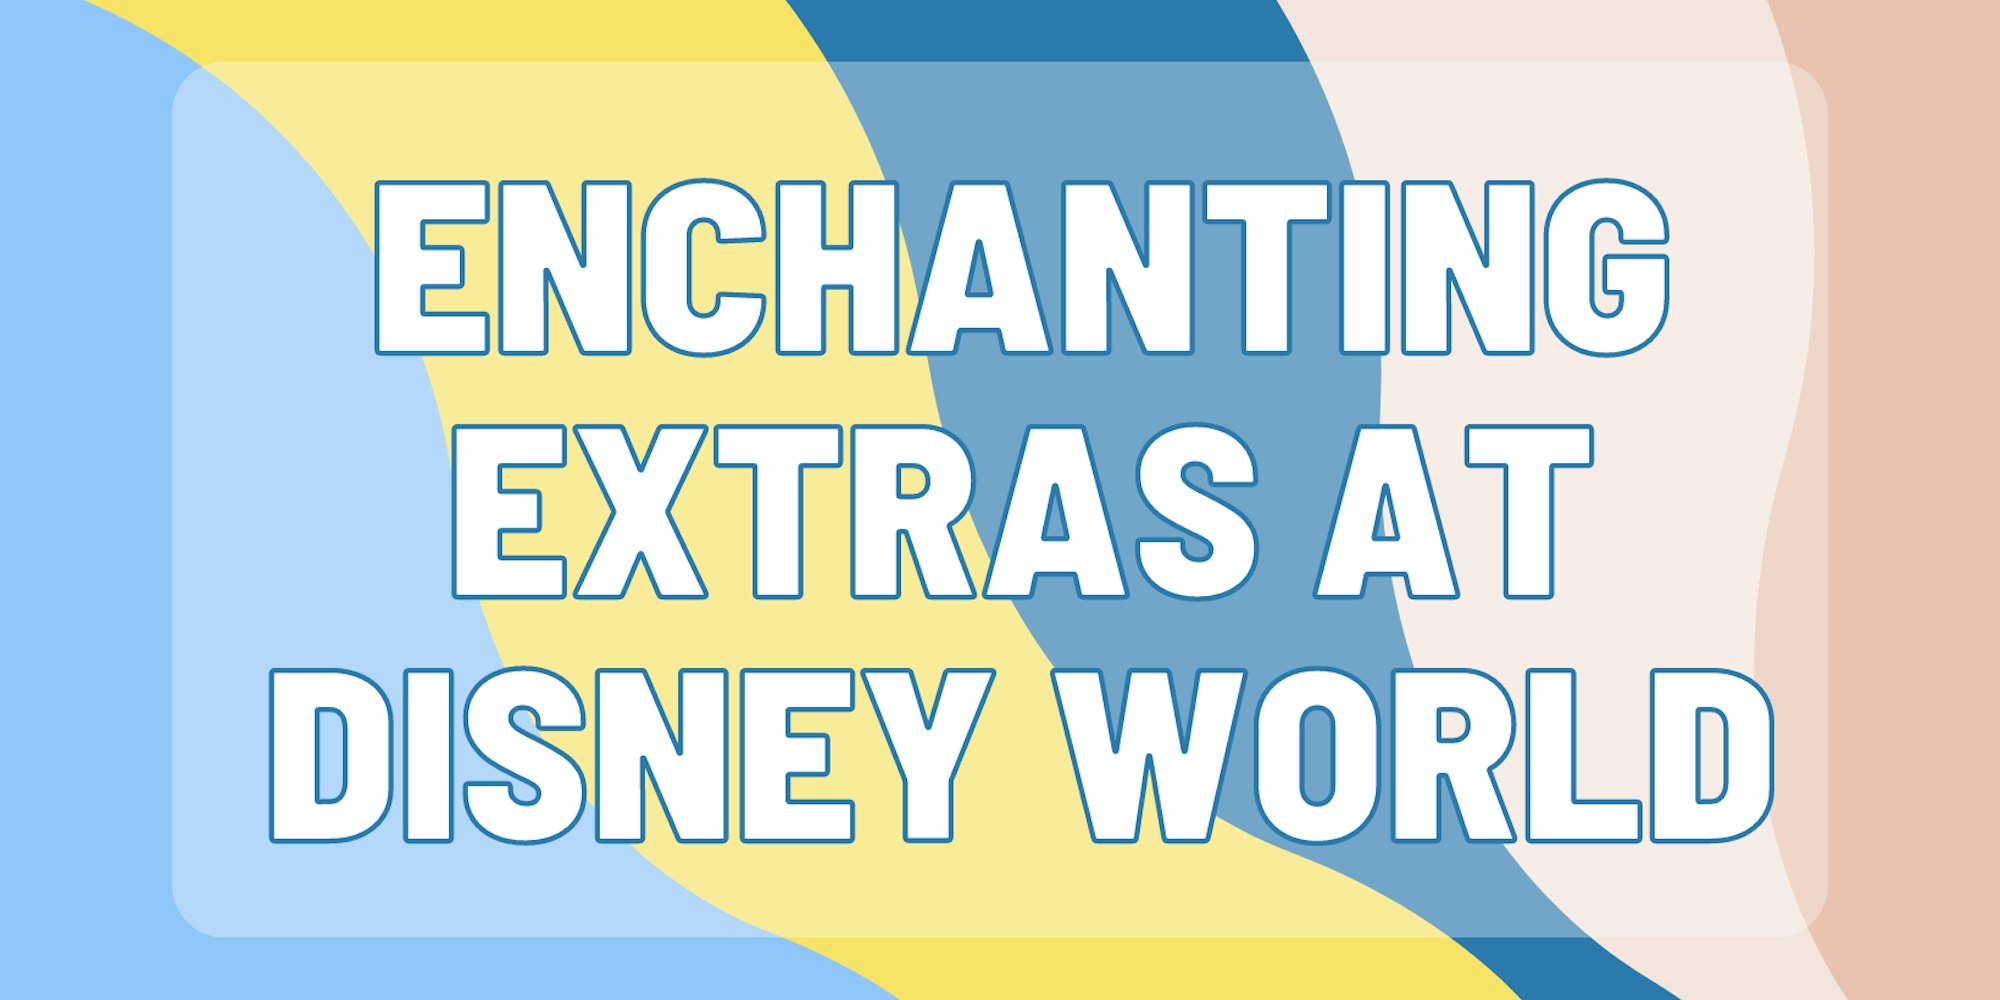 Cover Image for “Enchanting Extras” at Disney World